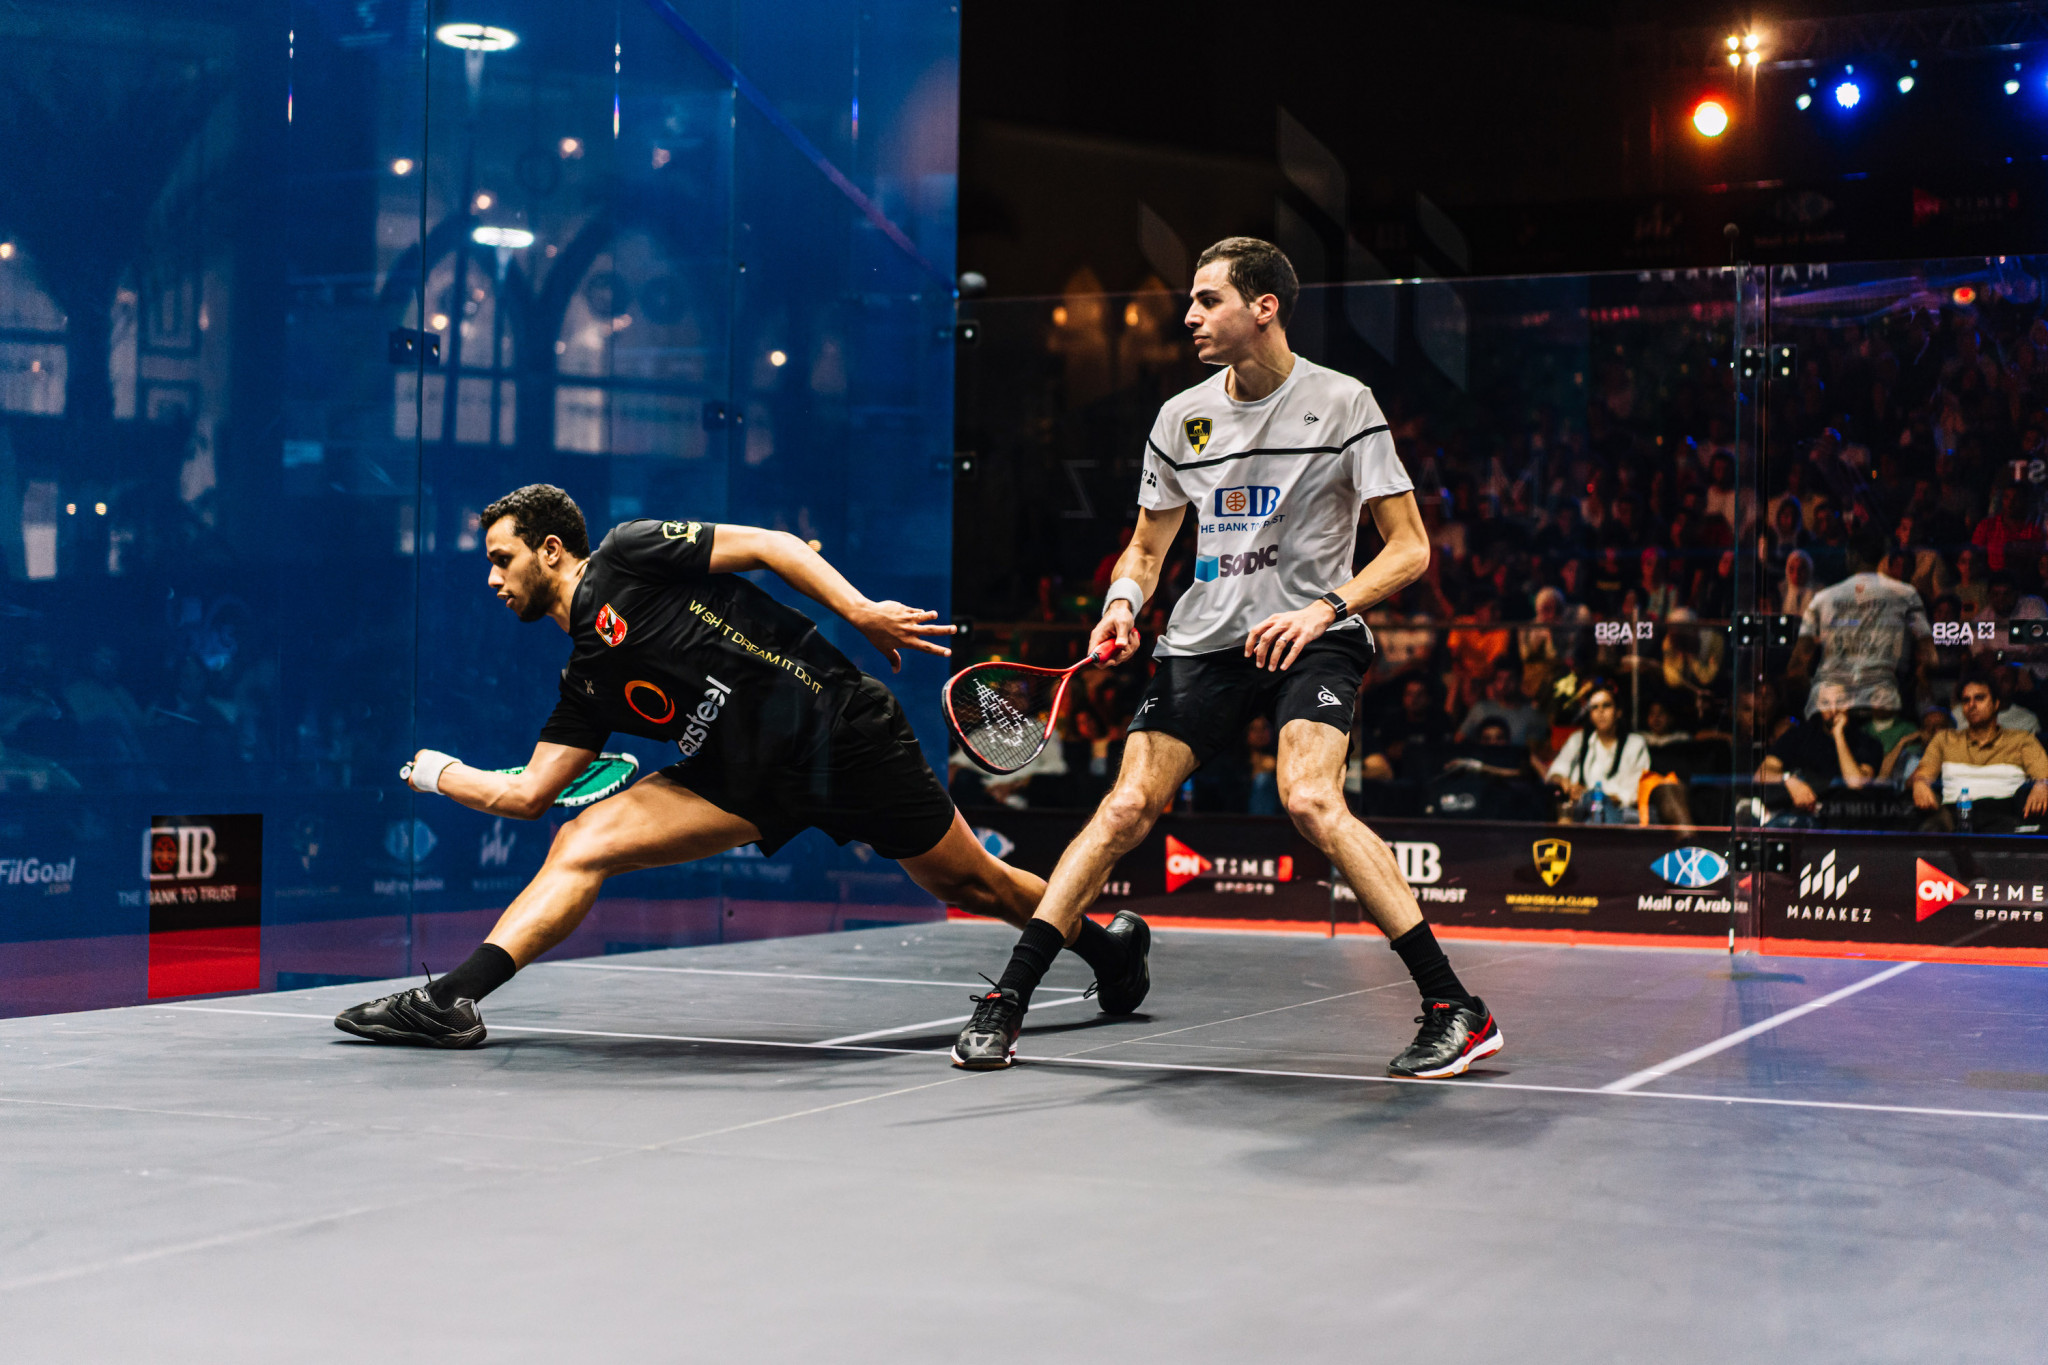 World Squash Federation and SquashLevels partner to deliver official ratings system